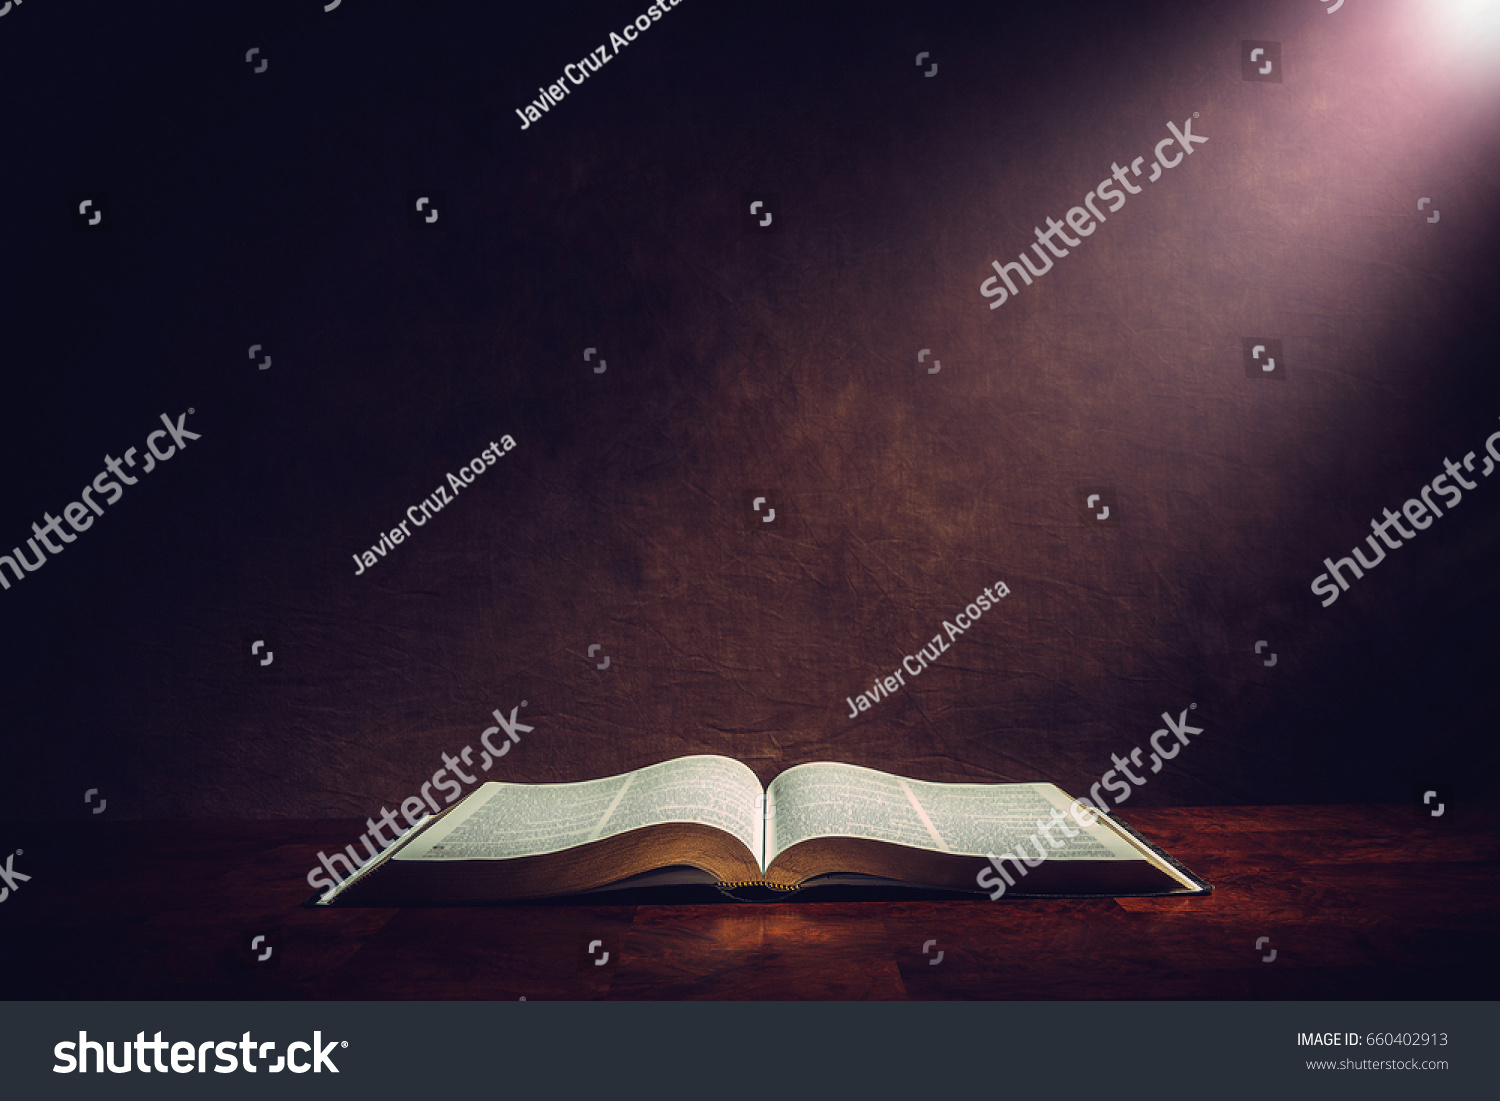 Light illuminating the Holy Bible on a wooded table. #660402913